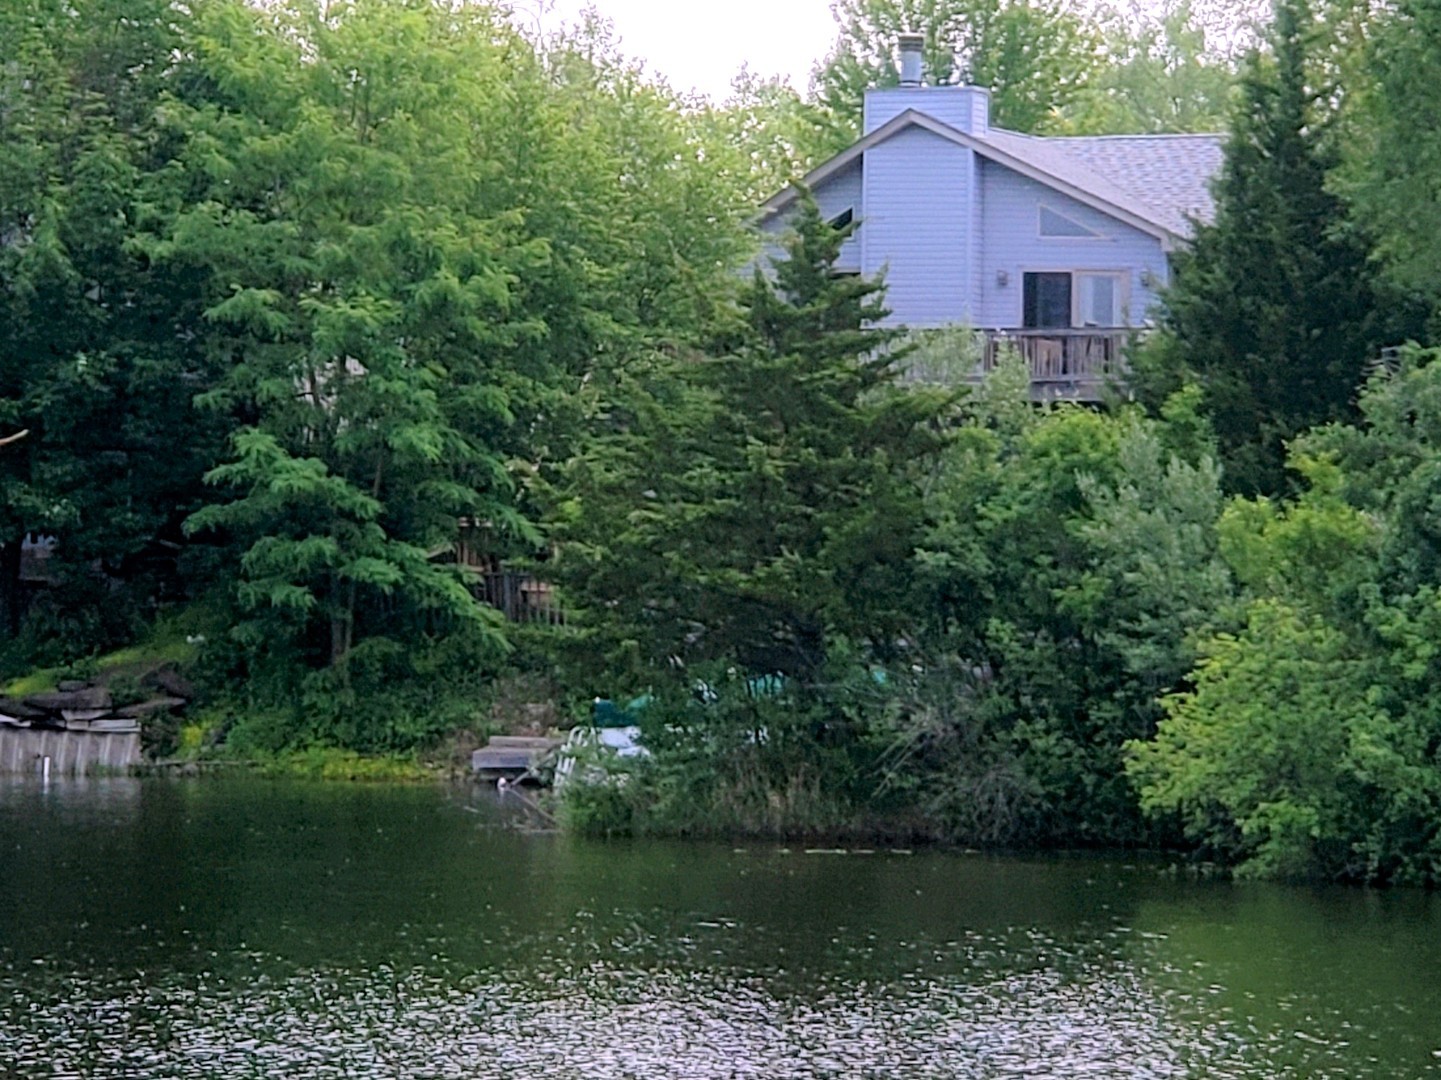 a view of a house with a yard and a pond